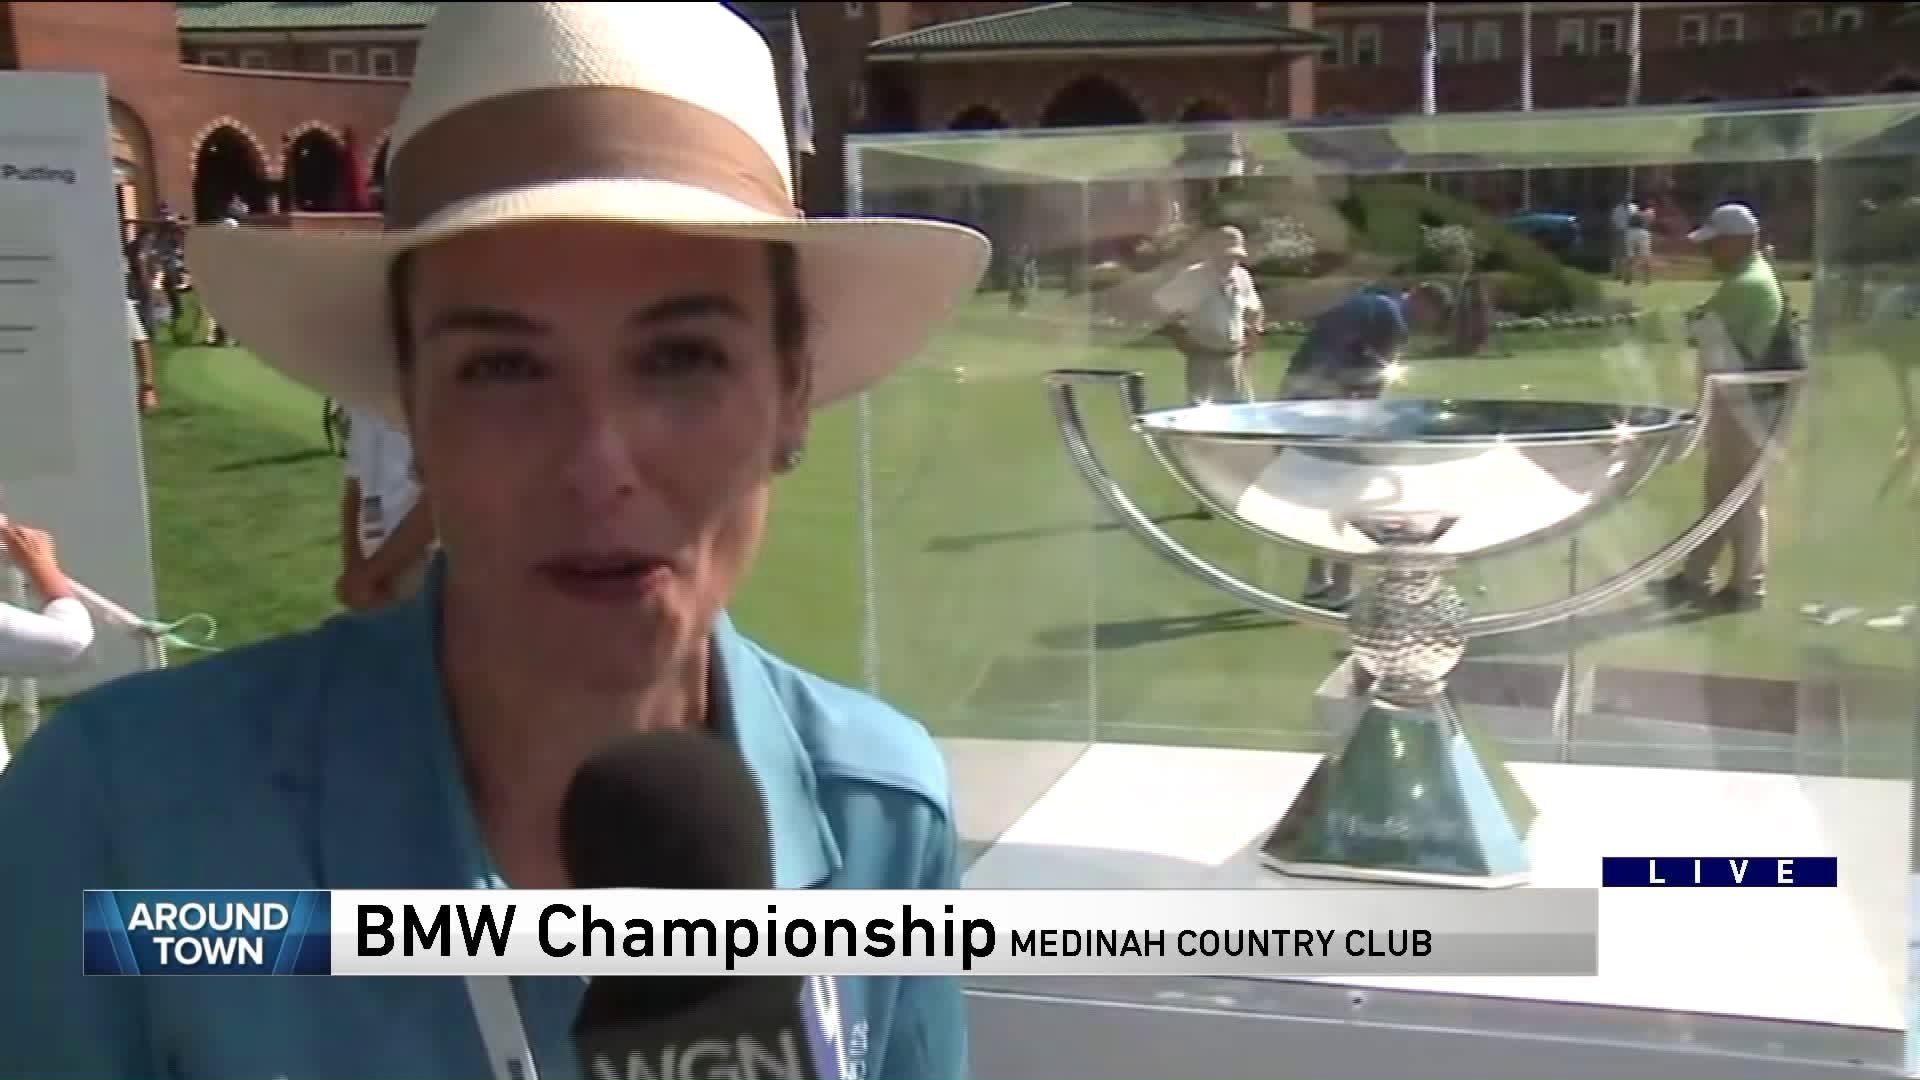 Around Town previews the 2019 BMW Championship